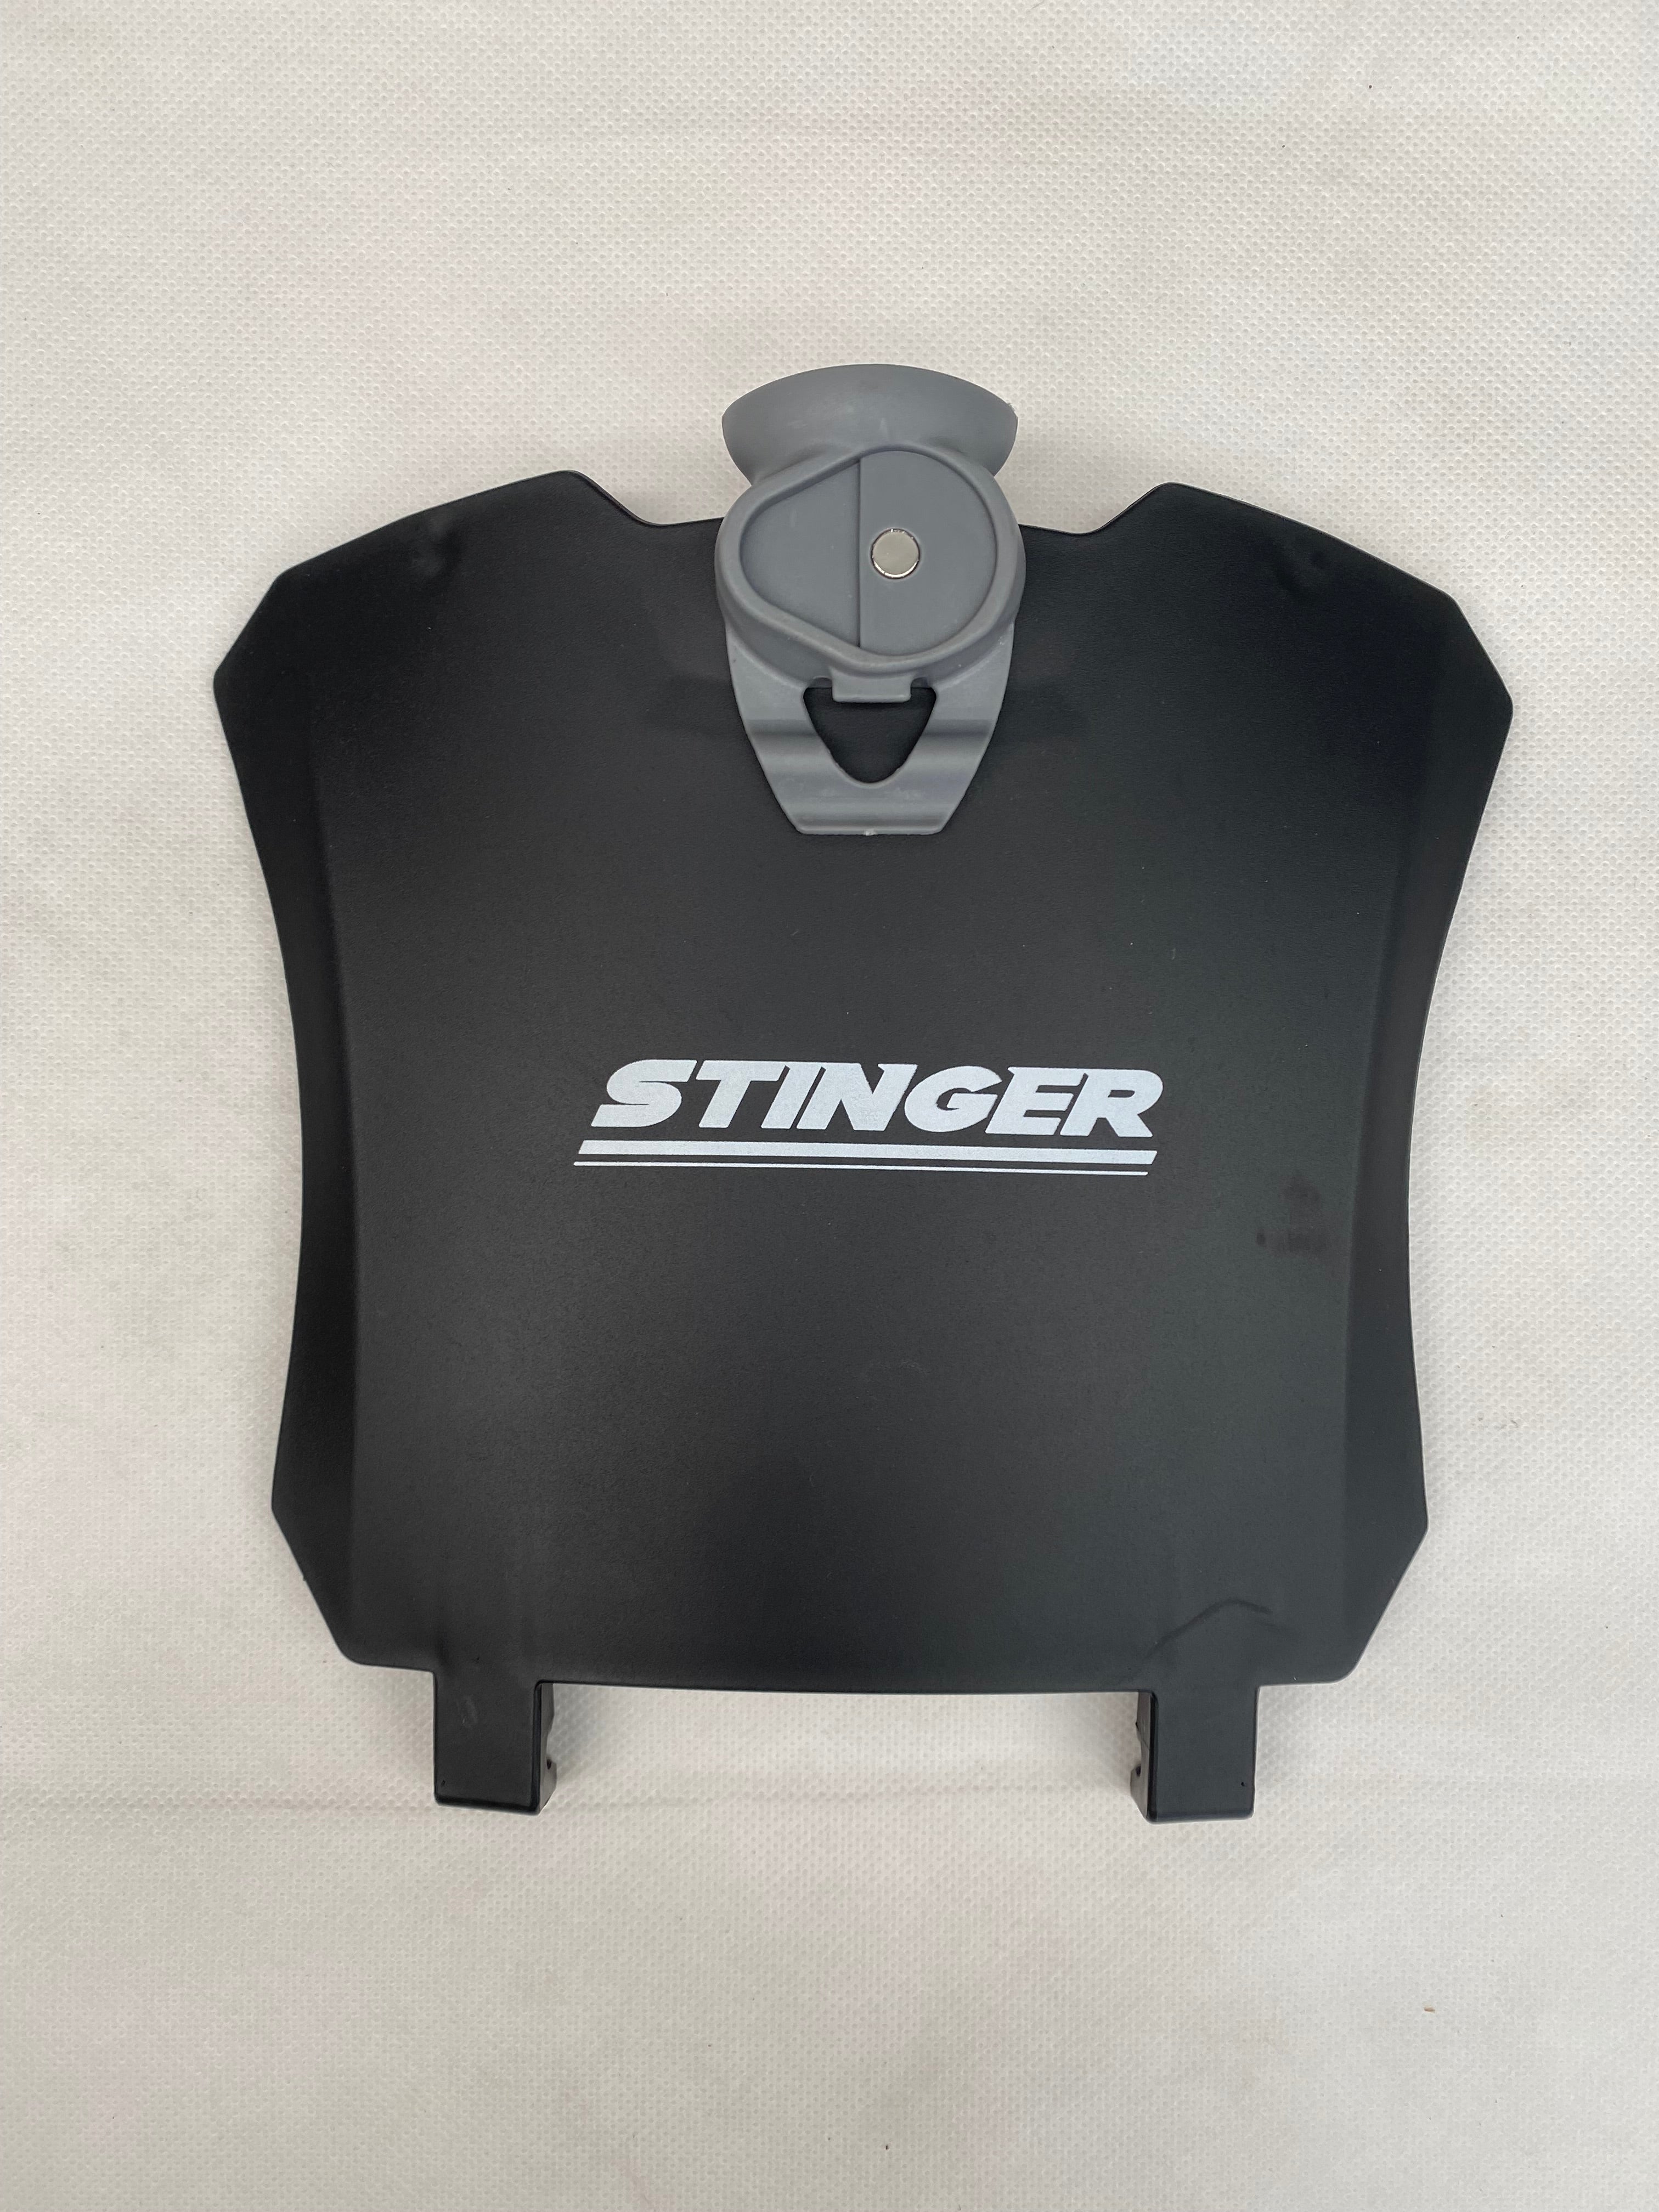 SG-6 TOP CONSOLE LID WITH LOGO - Stinger Golf Products